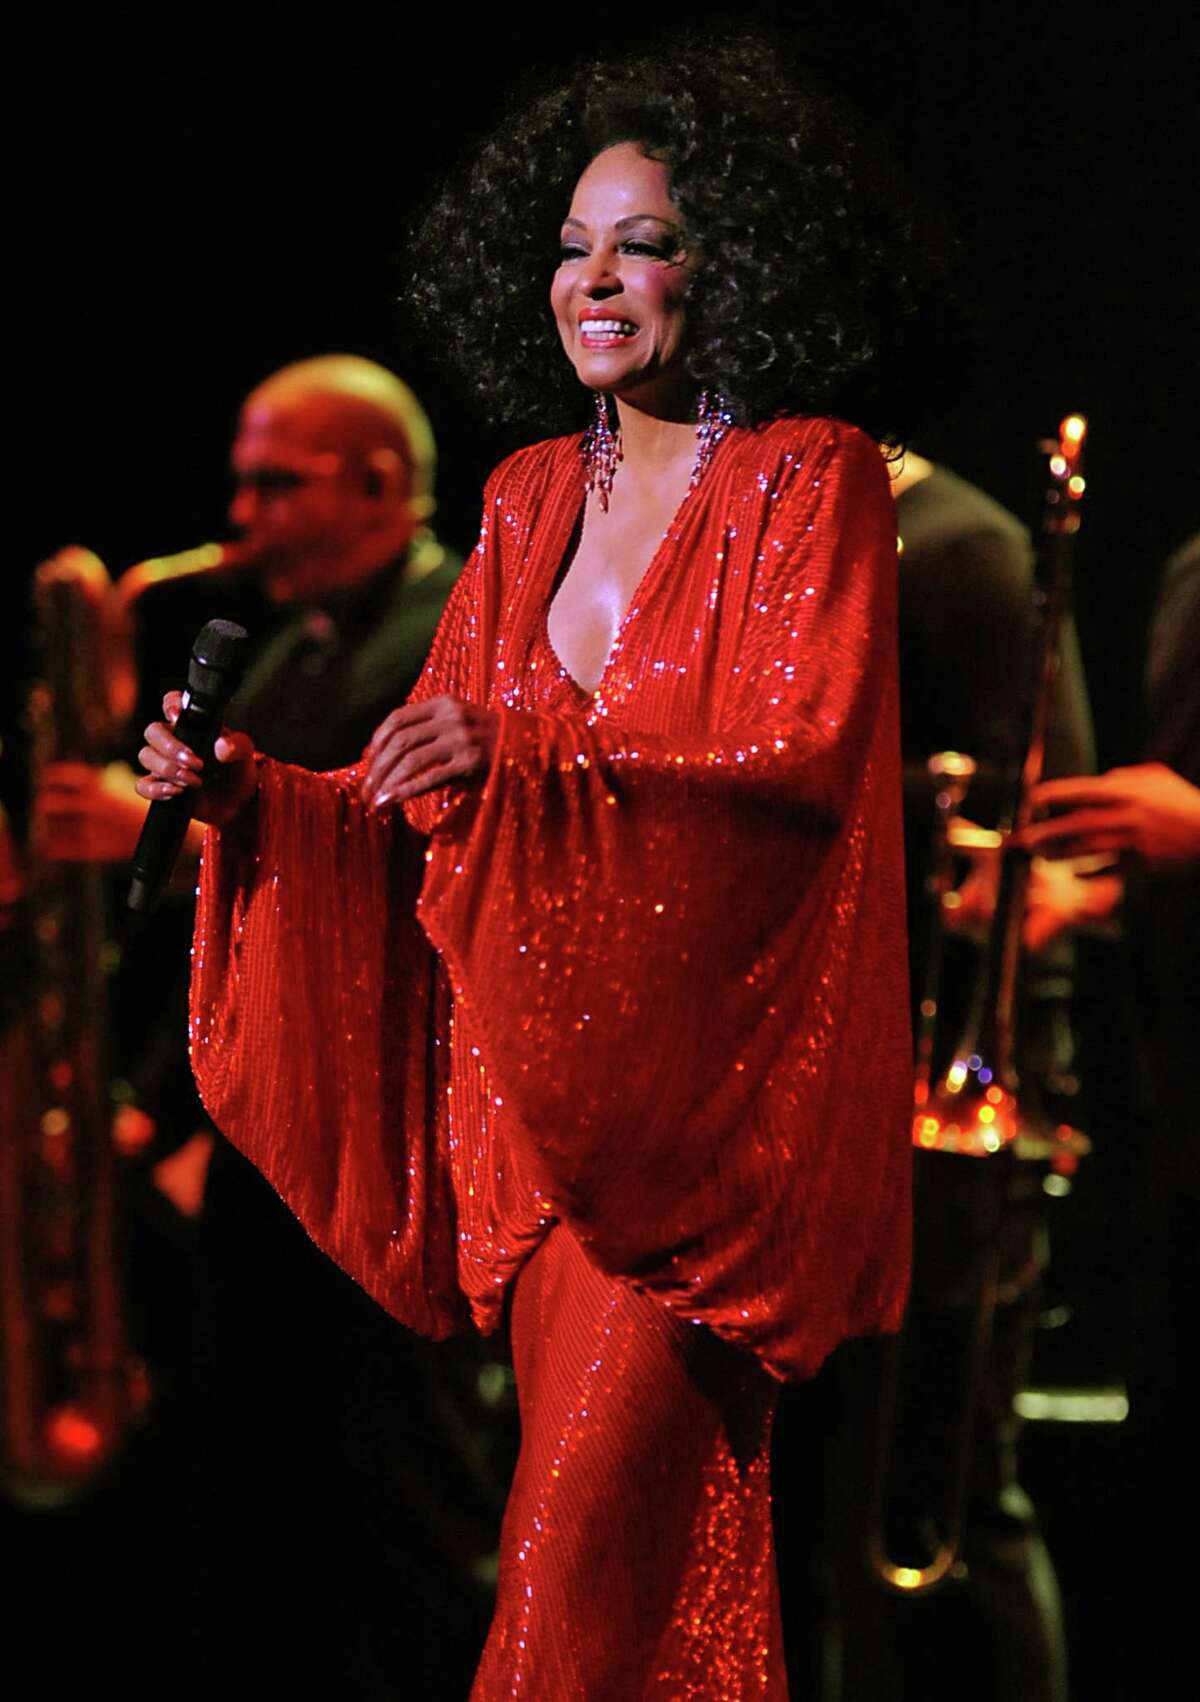 Pop legend Diana Ross sings during a concert at the Palace Theatre in Albany, NY on September 15, 2010. (Lori Van Buren / Times Union)